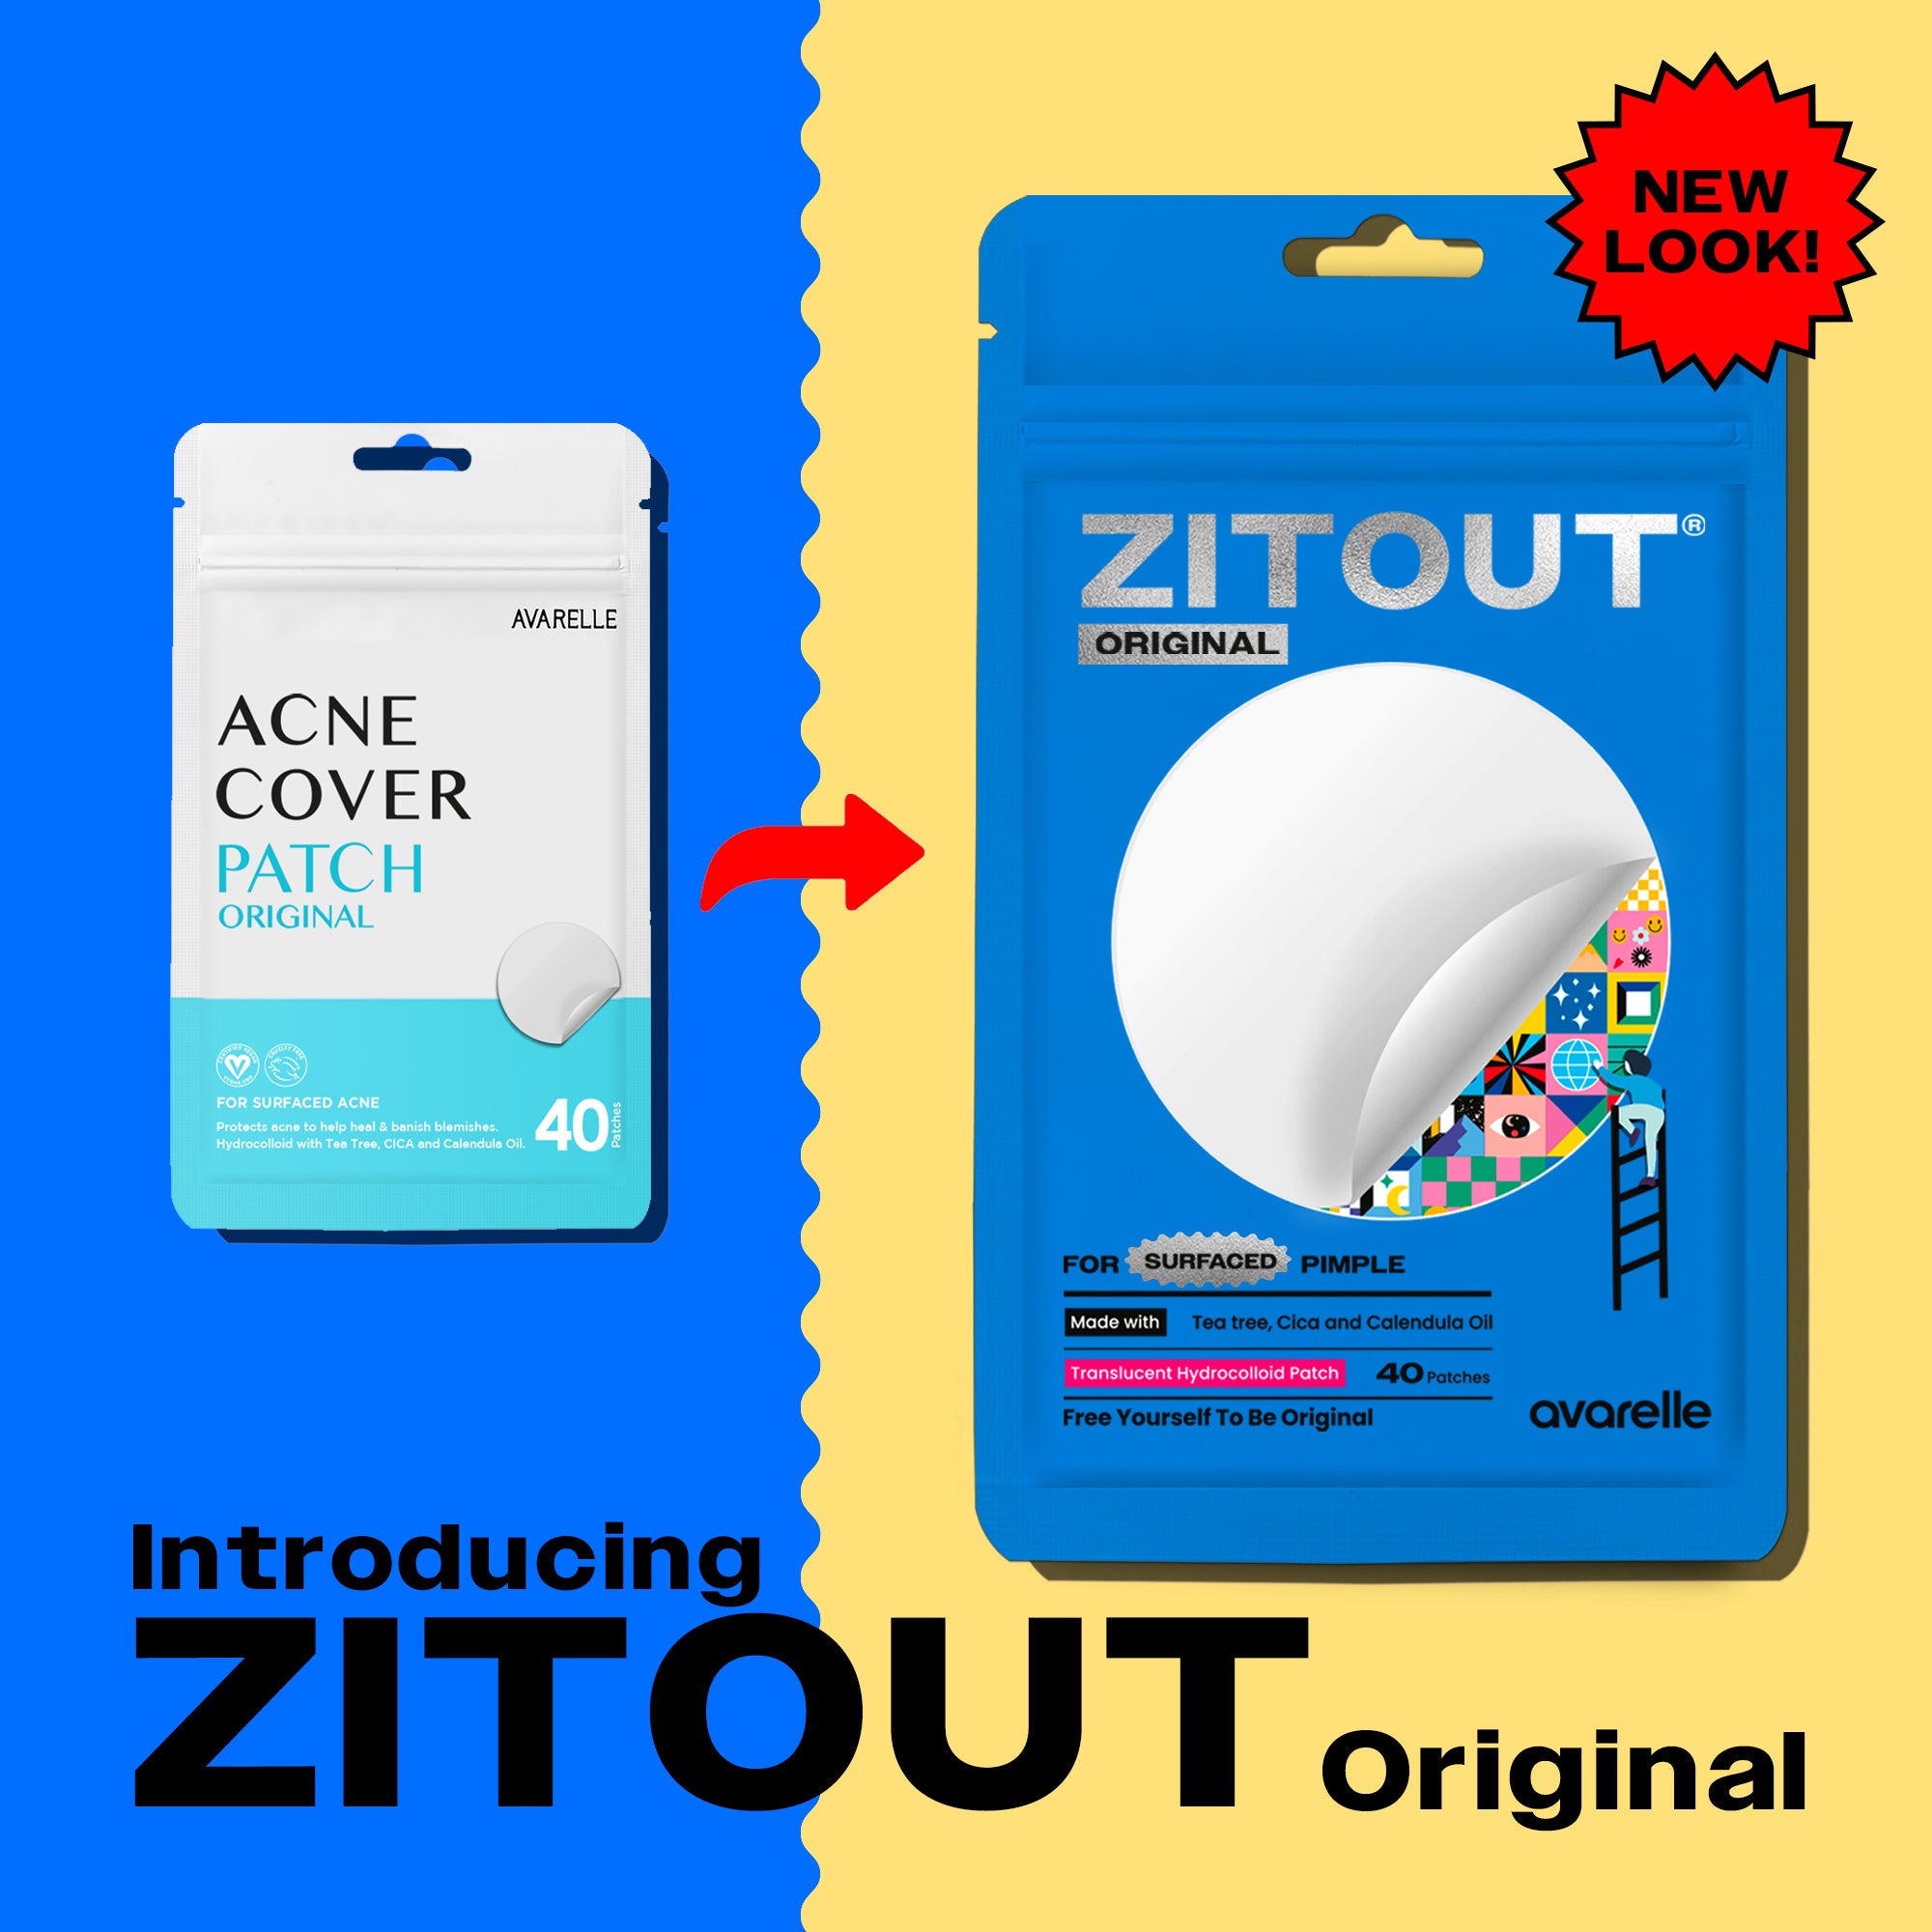 Rebranding from Avarelle Acne Cover Patch Original to ZitOut Original "Free Yourself To Be Original" Old version on a blue background, and the new packaging on a bright yellow background.